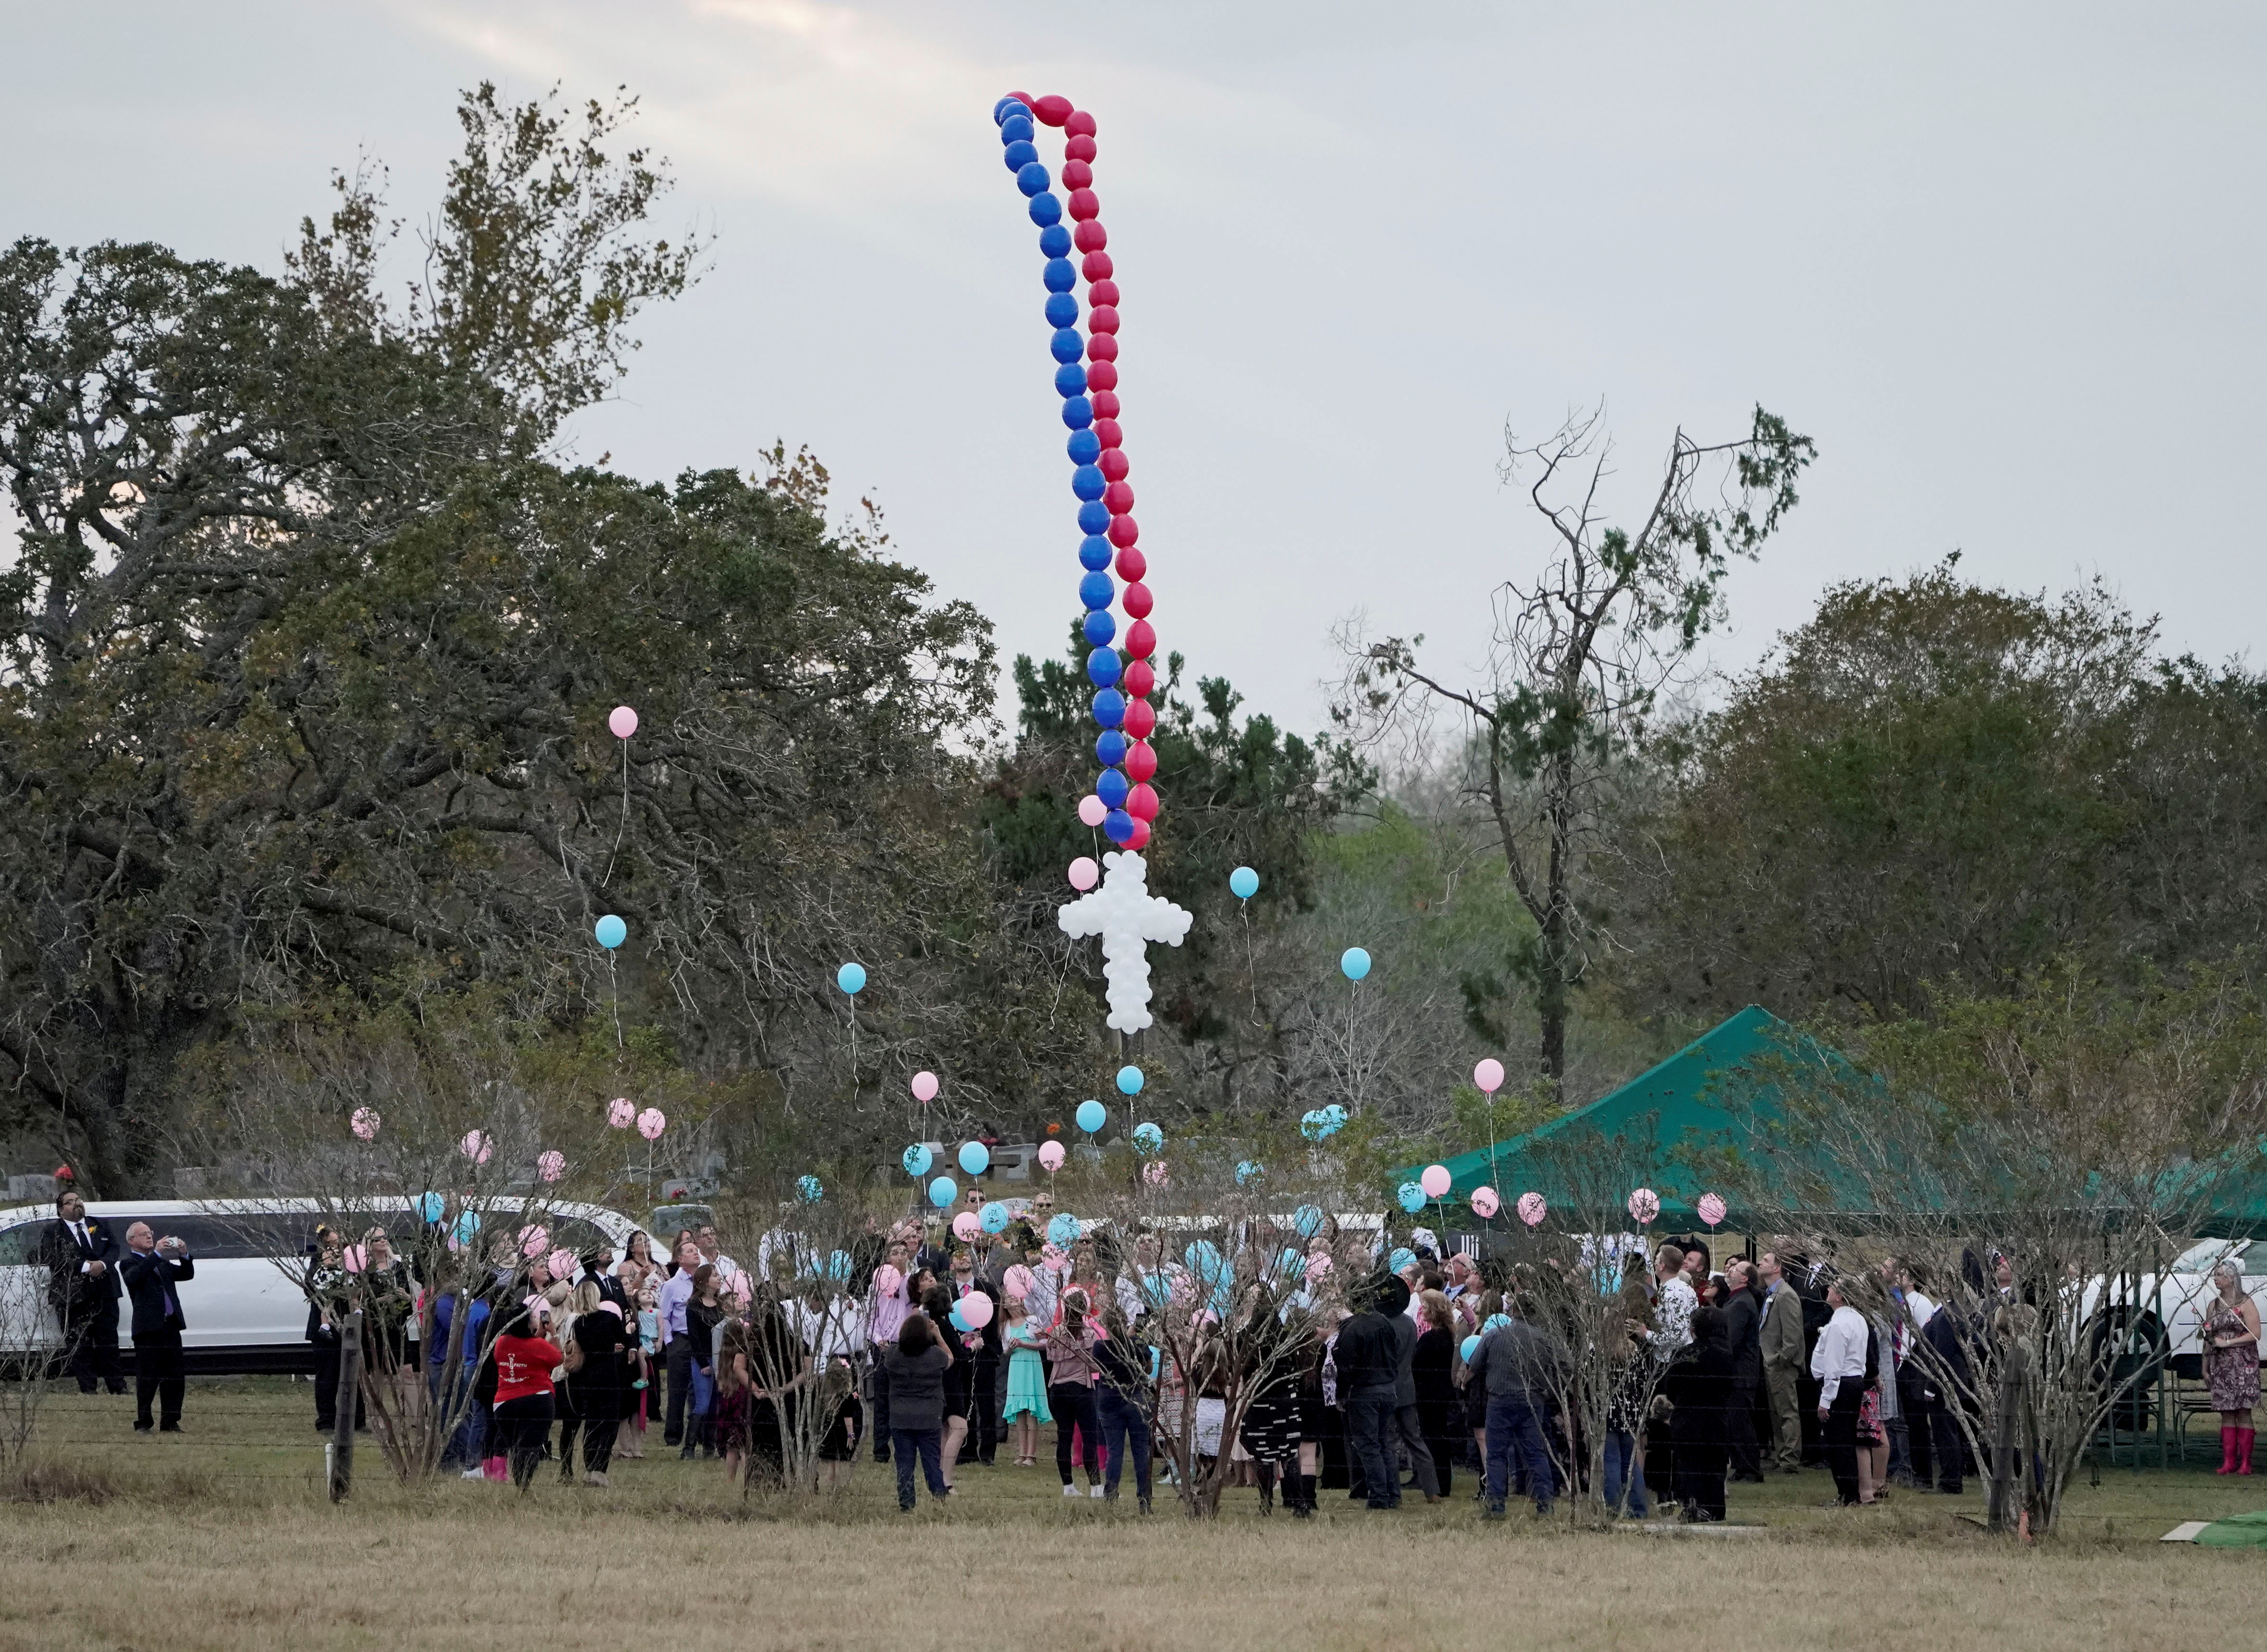 Balloons are released during a funeral for victims of the Sutherland Springs Baptist church shooting